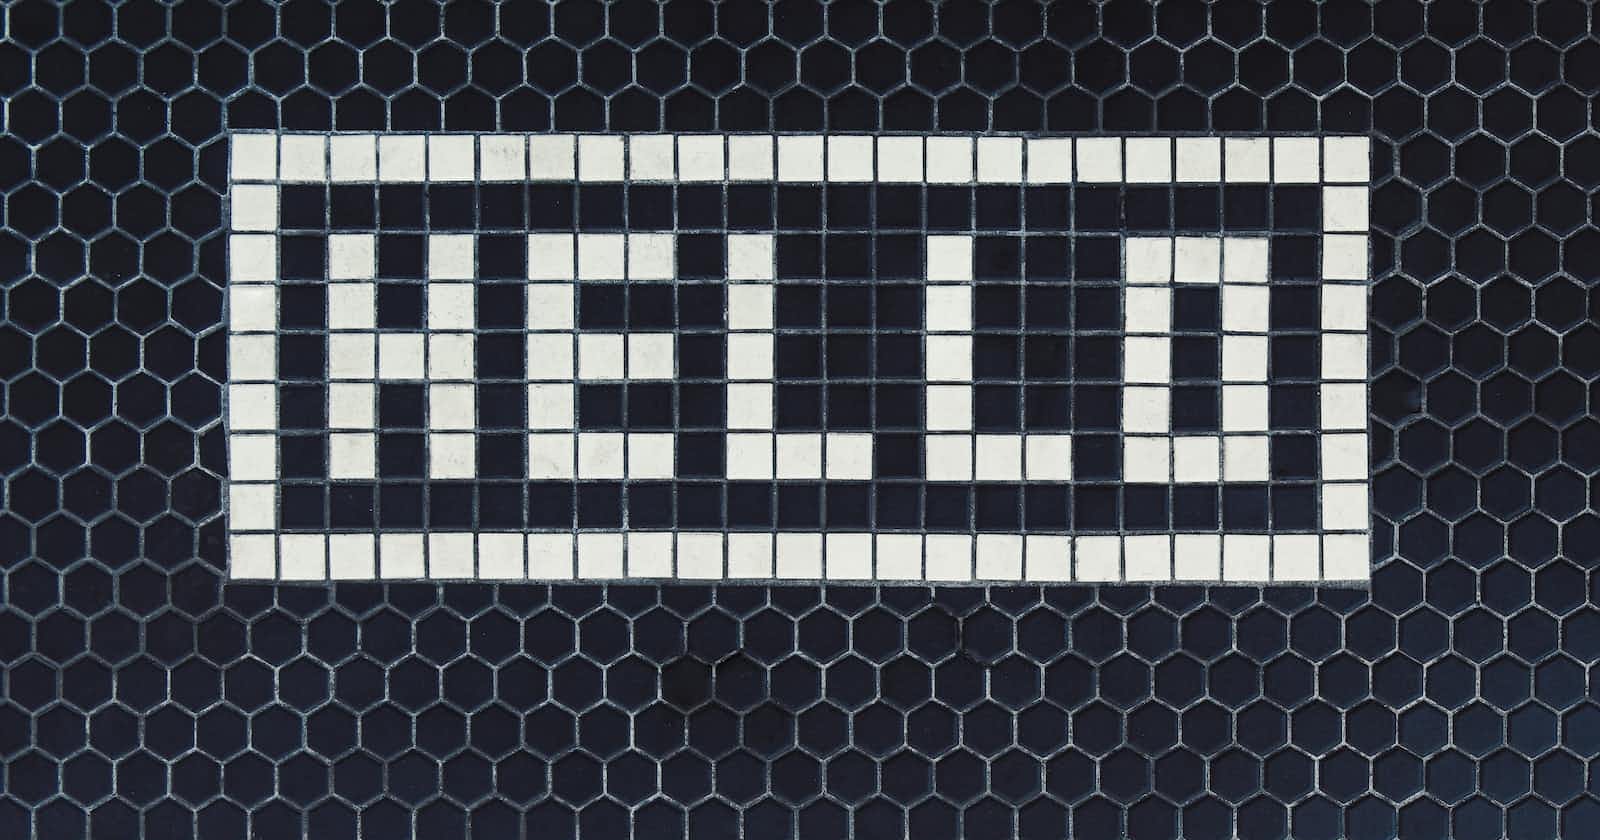 Cover Image for hello-world